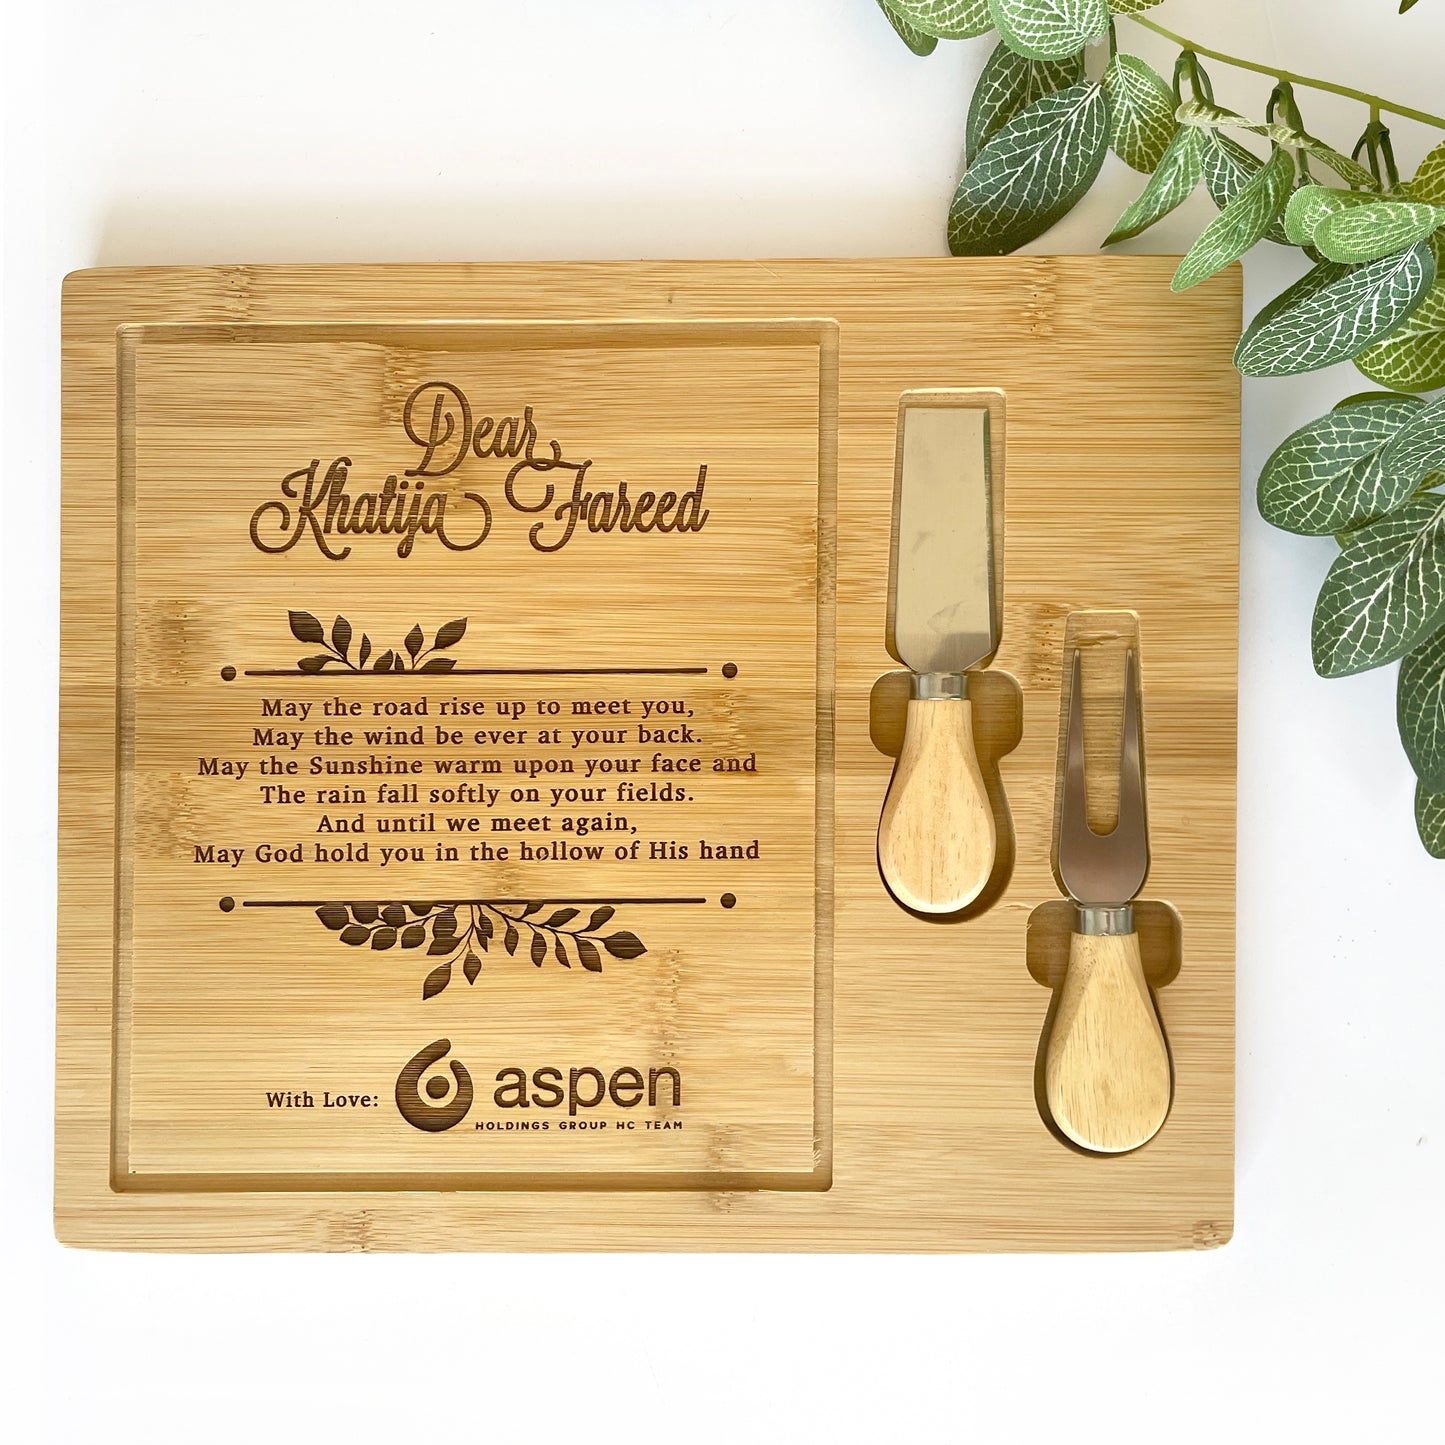 Personalized and engraved Cheese Board Set with wreath design